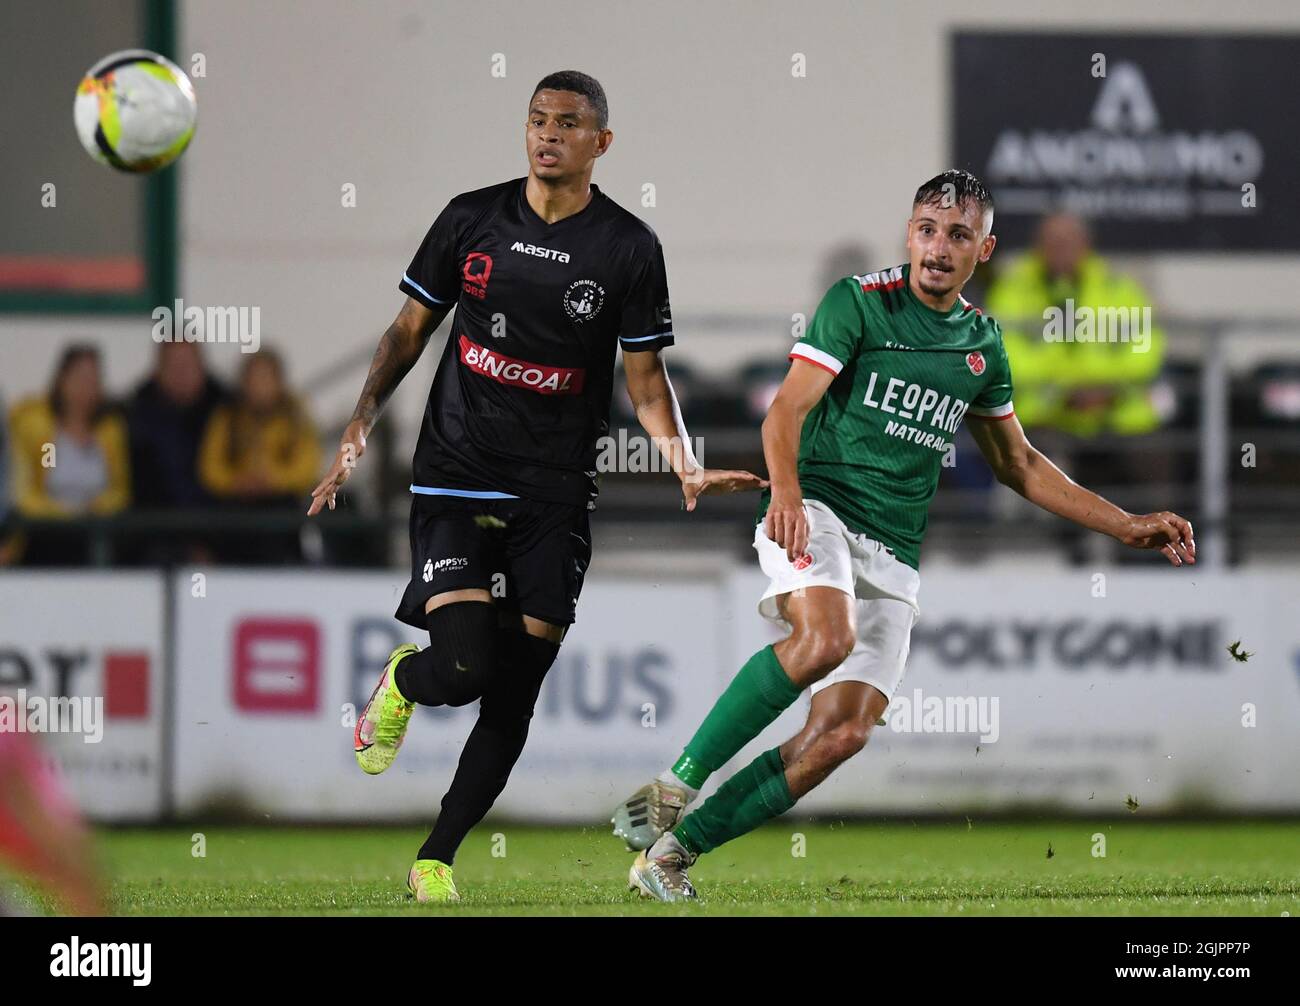 Lommel's Diego Silva Rosa and Virton's Hugo Colella fight for the ball during a soccer match between Royal Excelsior Virton and Lommel SK, Saturday 11 Stock Photo